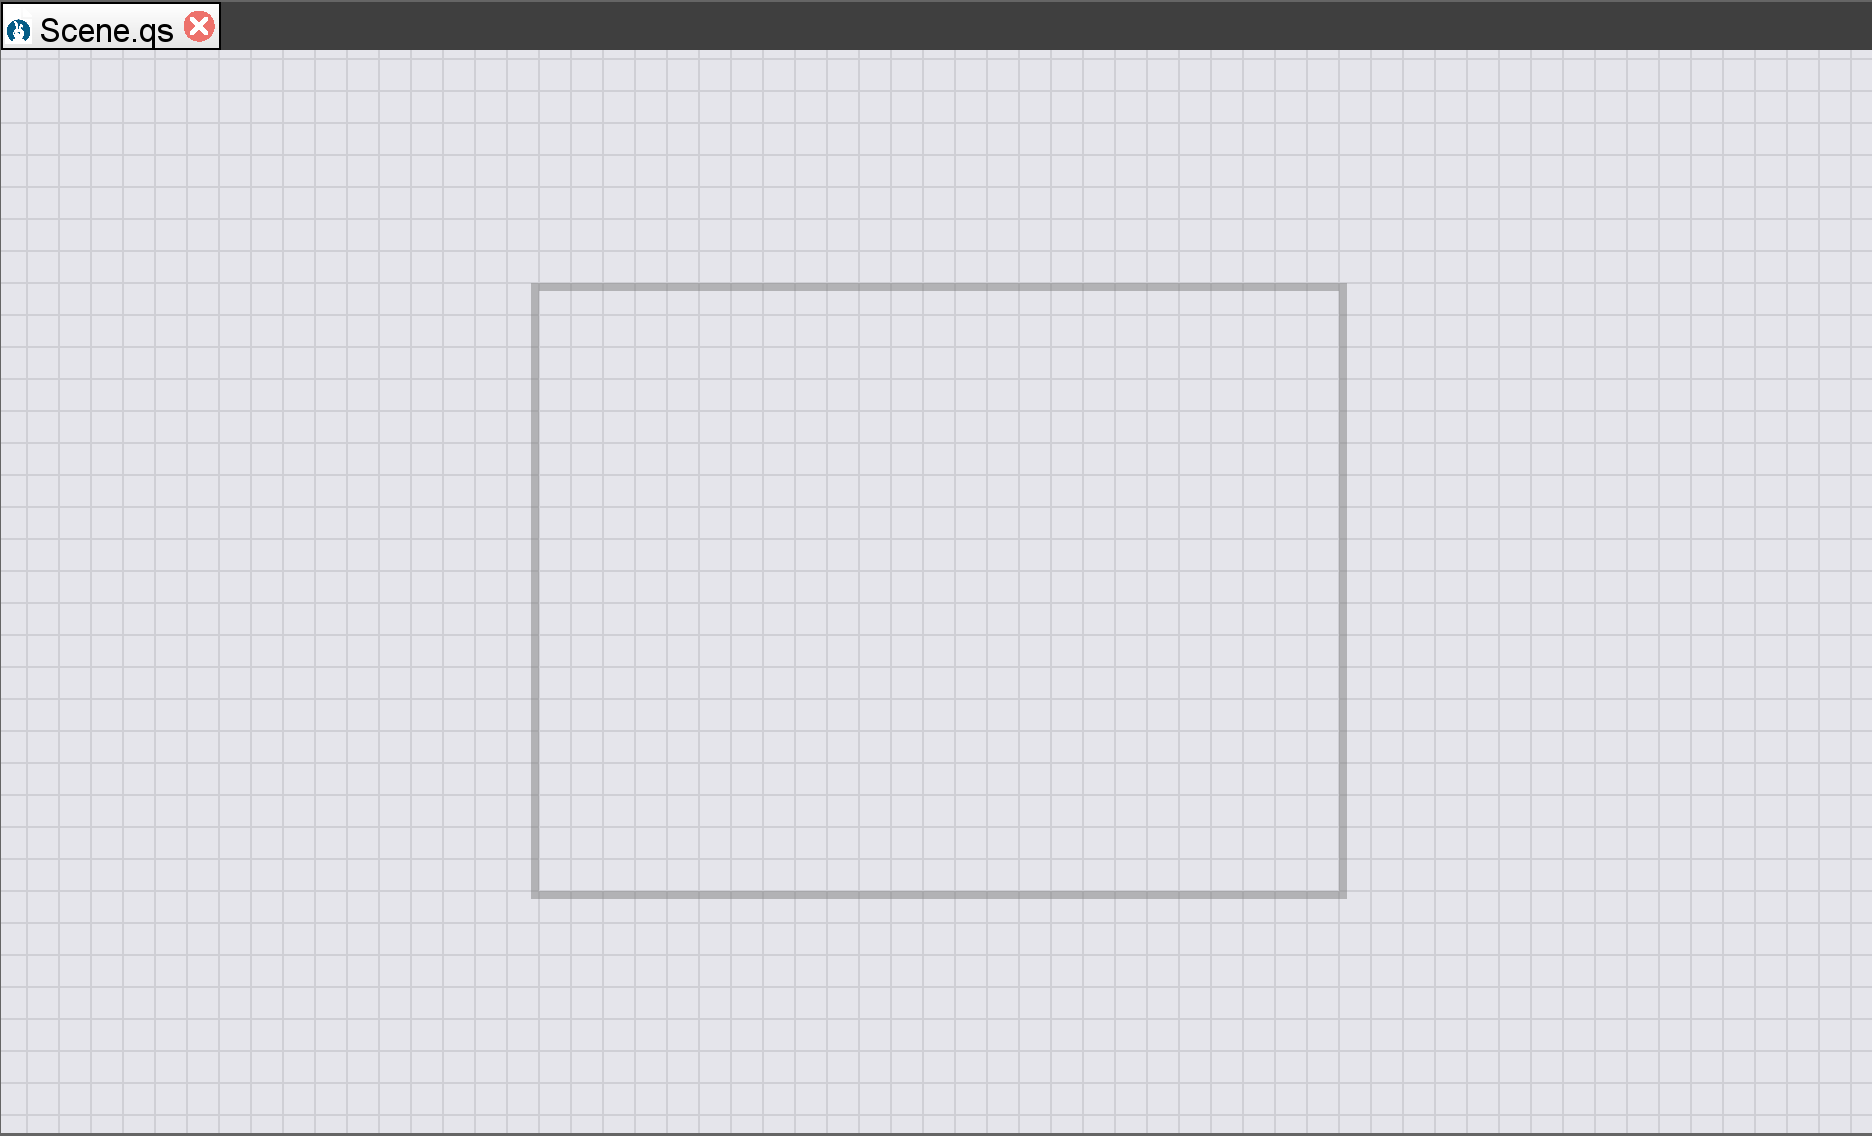 This is an image of the 2D grid in Quorum Studio. It shows a series of vertical and horizontal lines, each separated by 32 pixels by default. In the center of this grid is the view of the camera, which is shown visually as a darker grey outline.